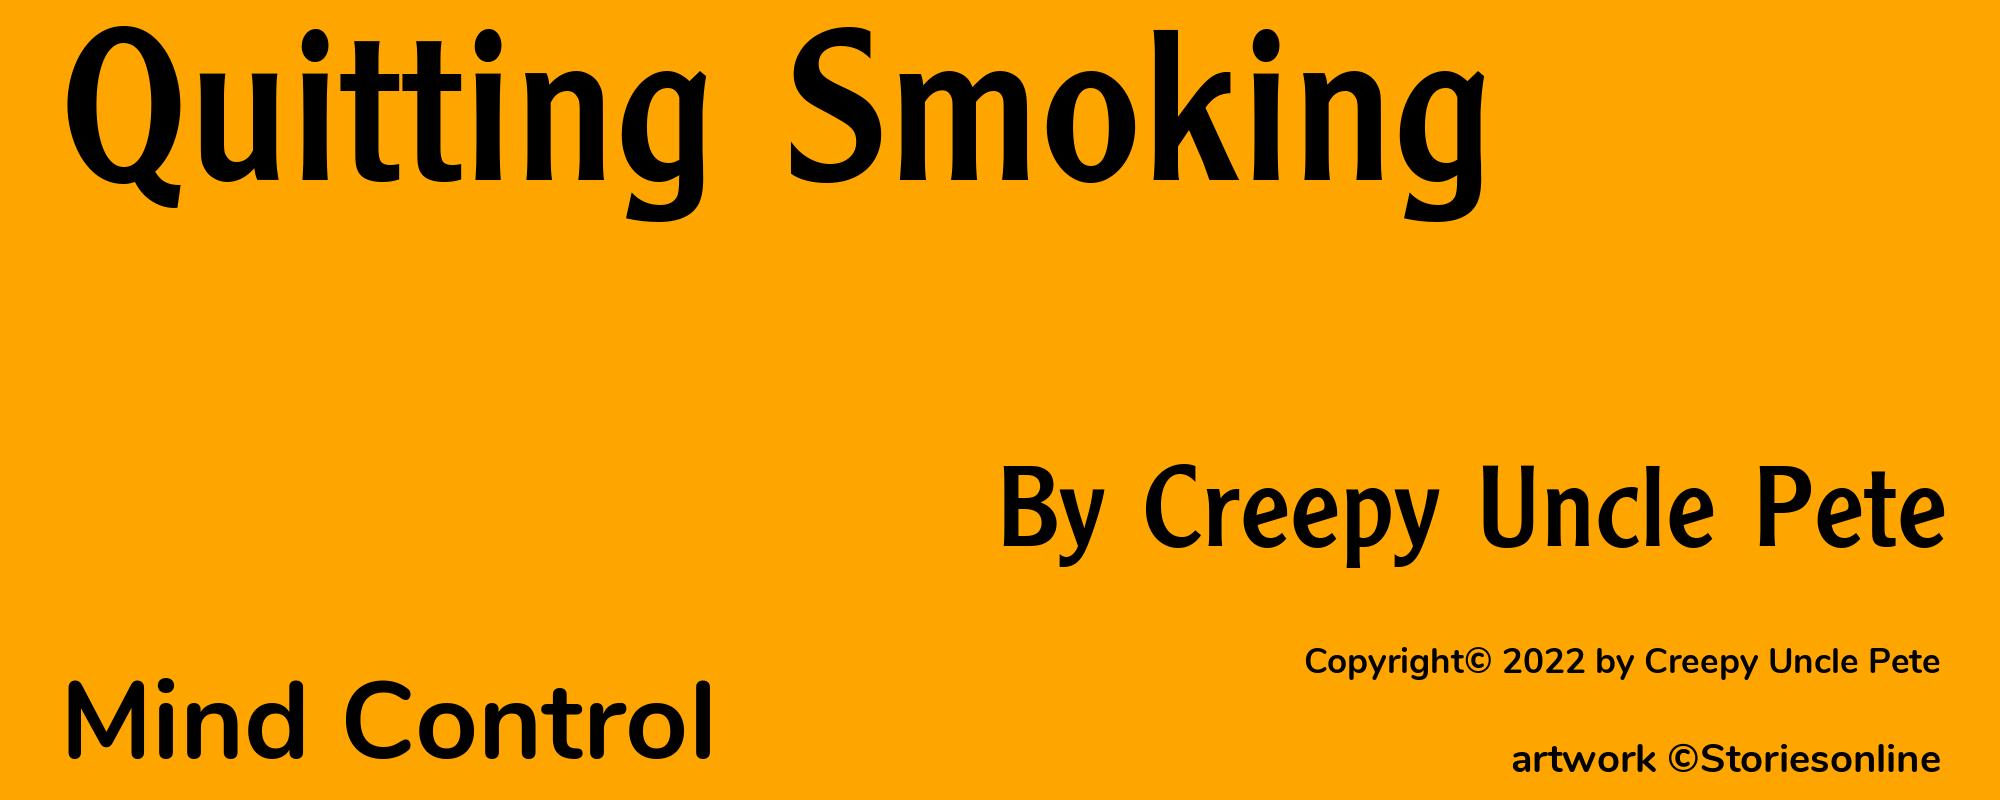 Quitting Smoking - Cover